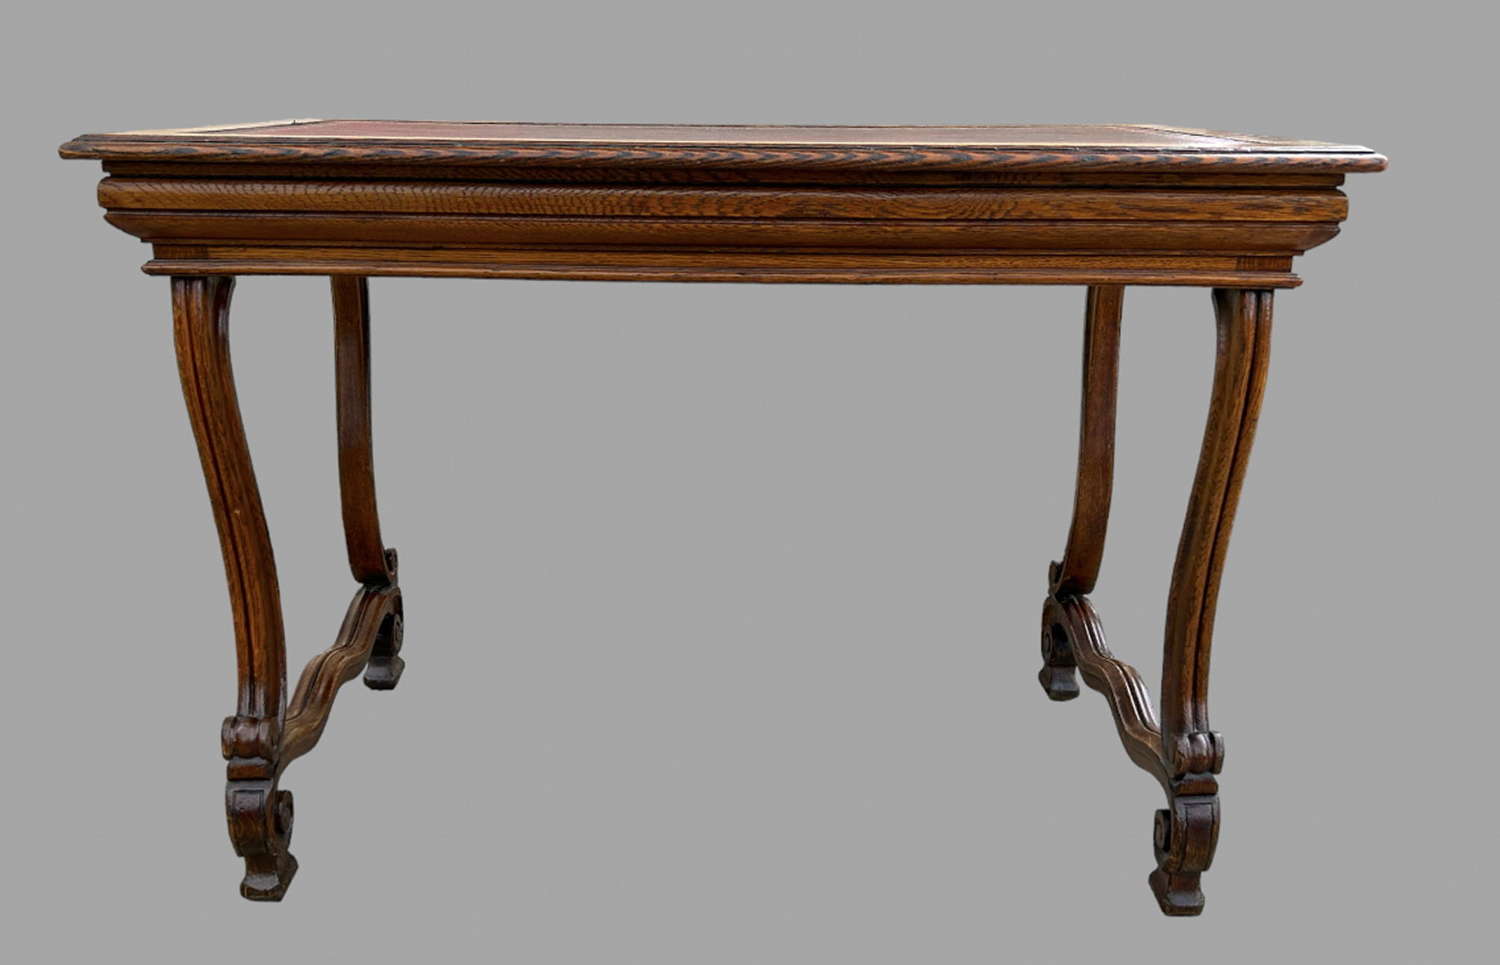 A c1900 French Golden Oak Writing Table